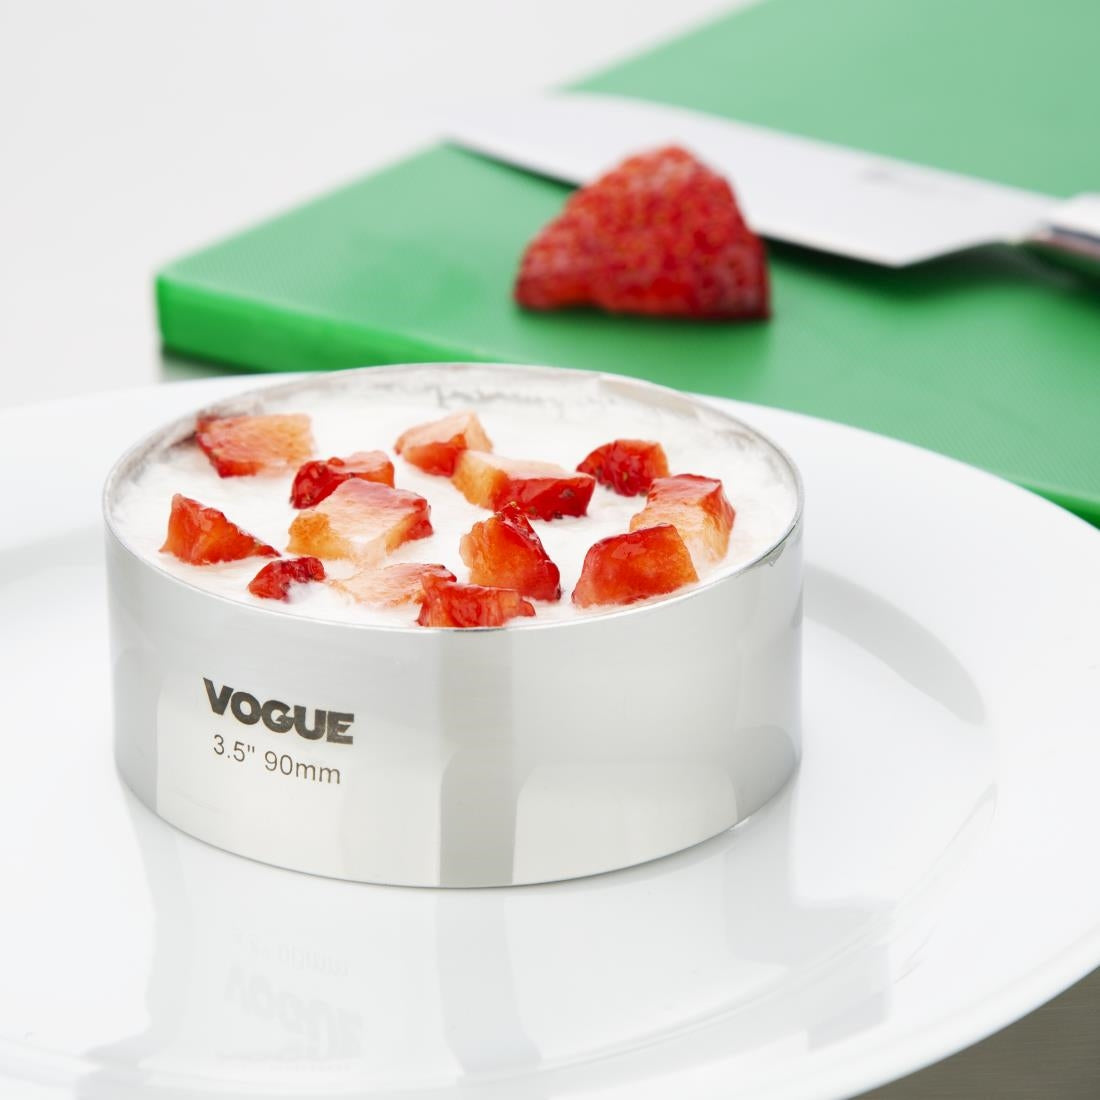 CC057 Vogue Mousse Ring 35 x 90mm JD Catering Equipment Solutions Ltd